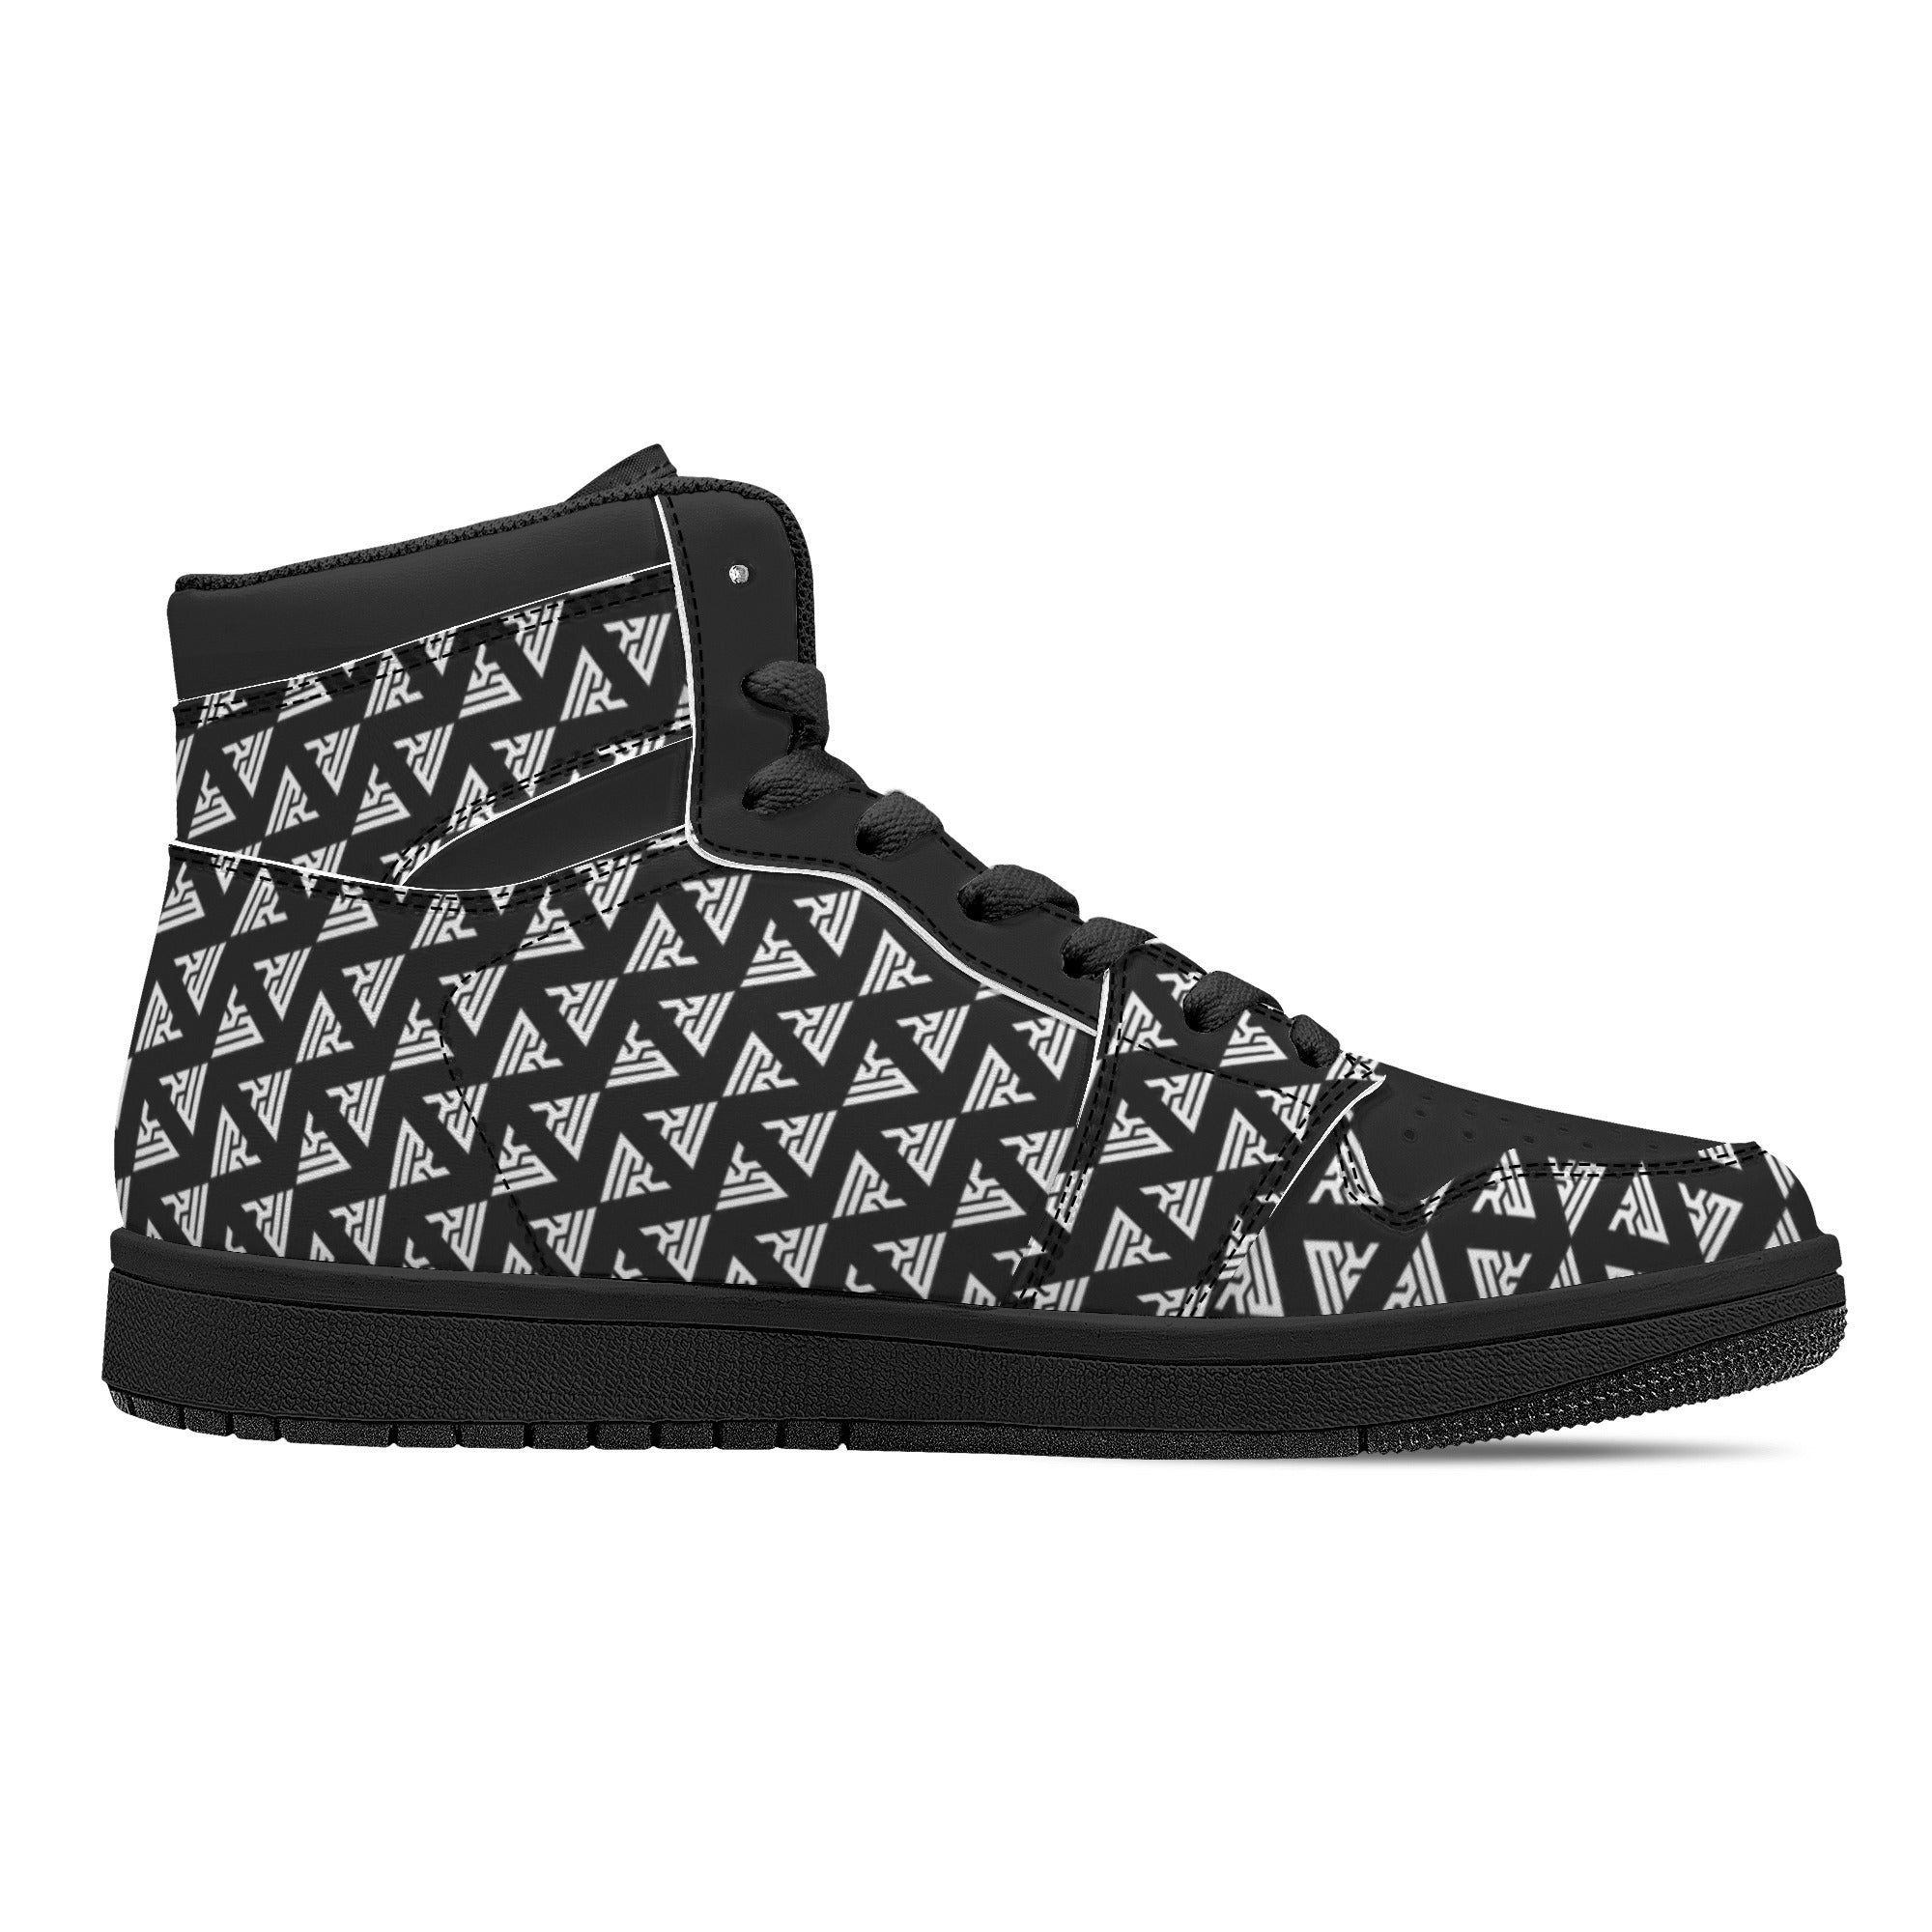 Mens Black High Top Leather Sneakers Rongoworks